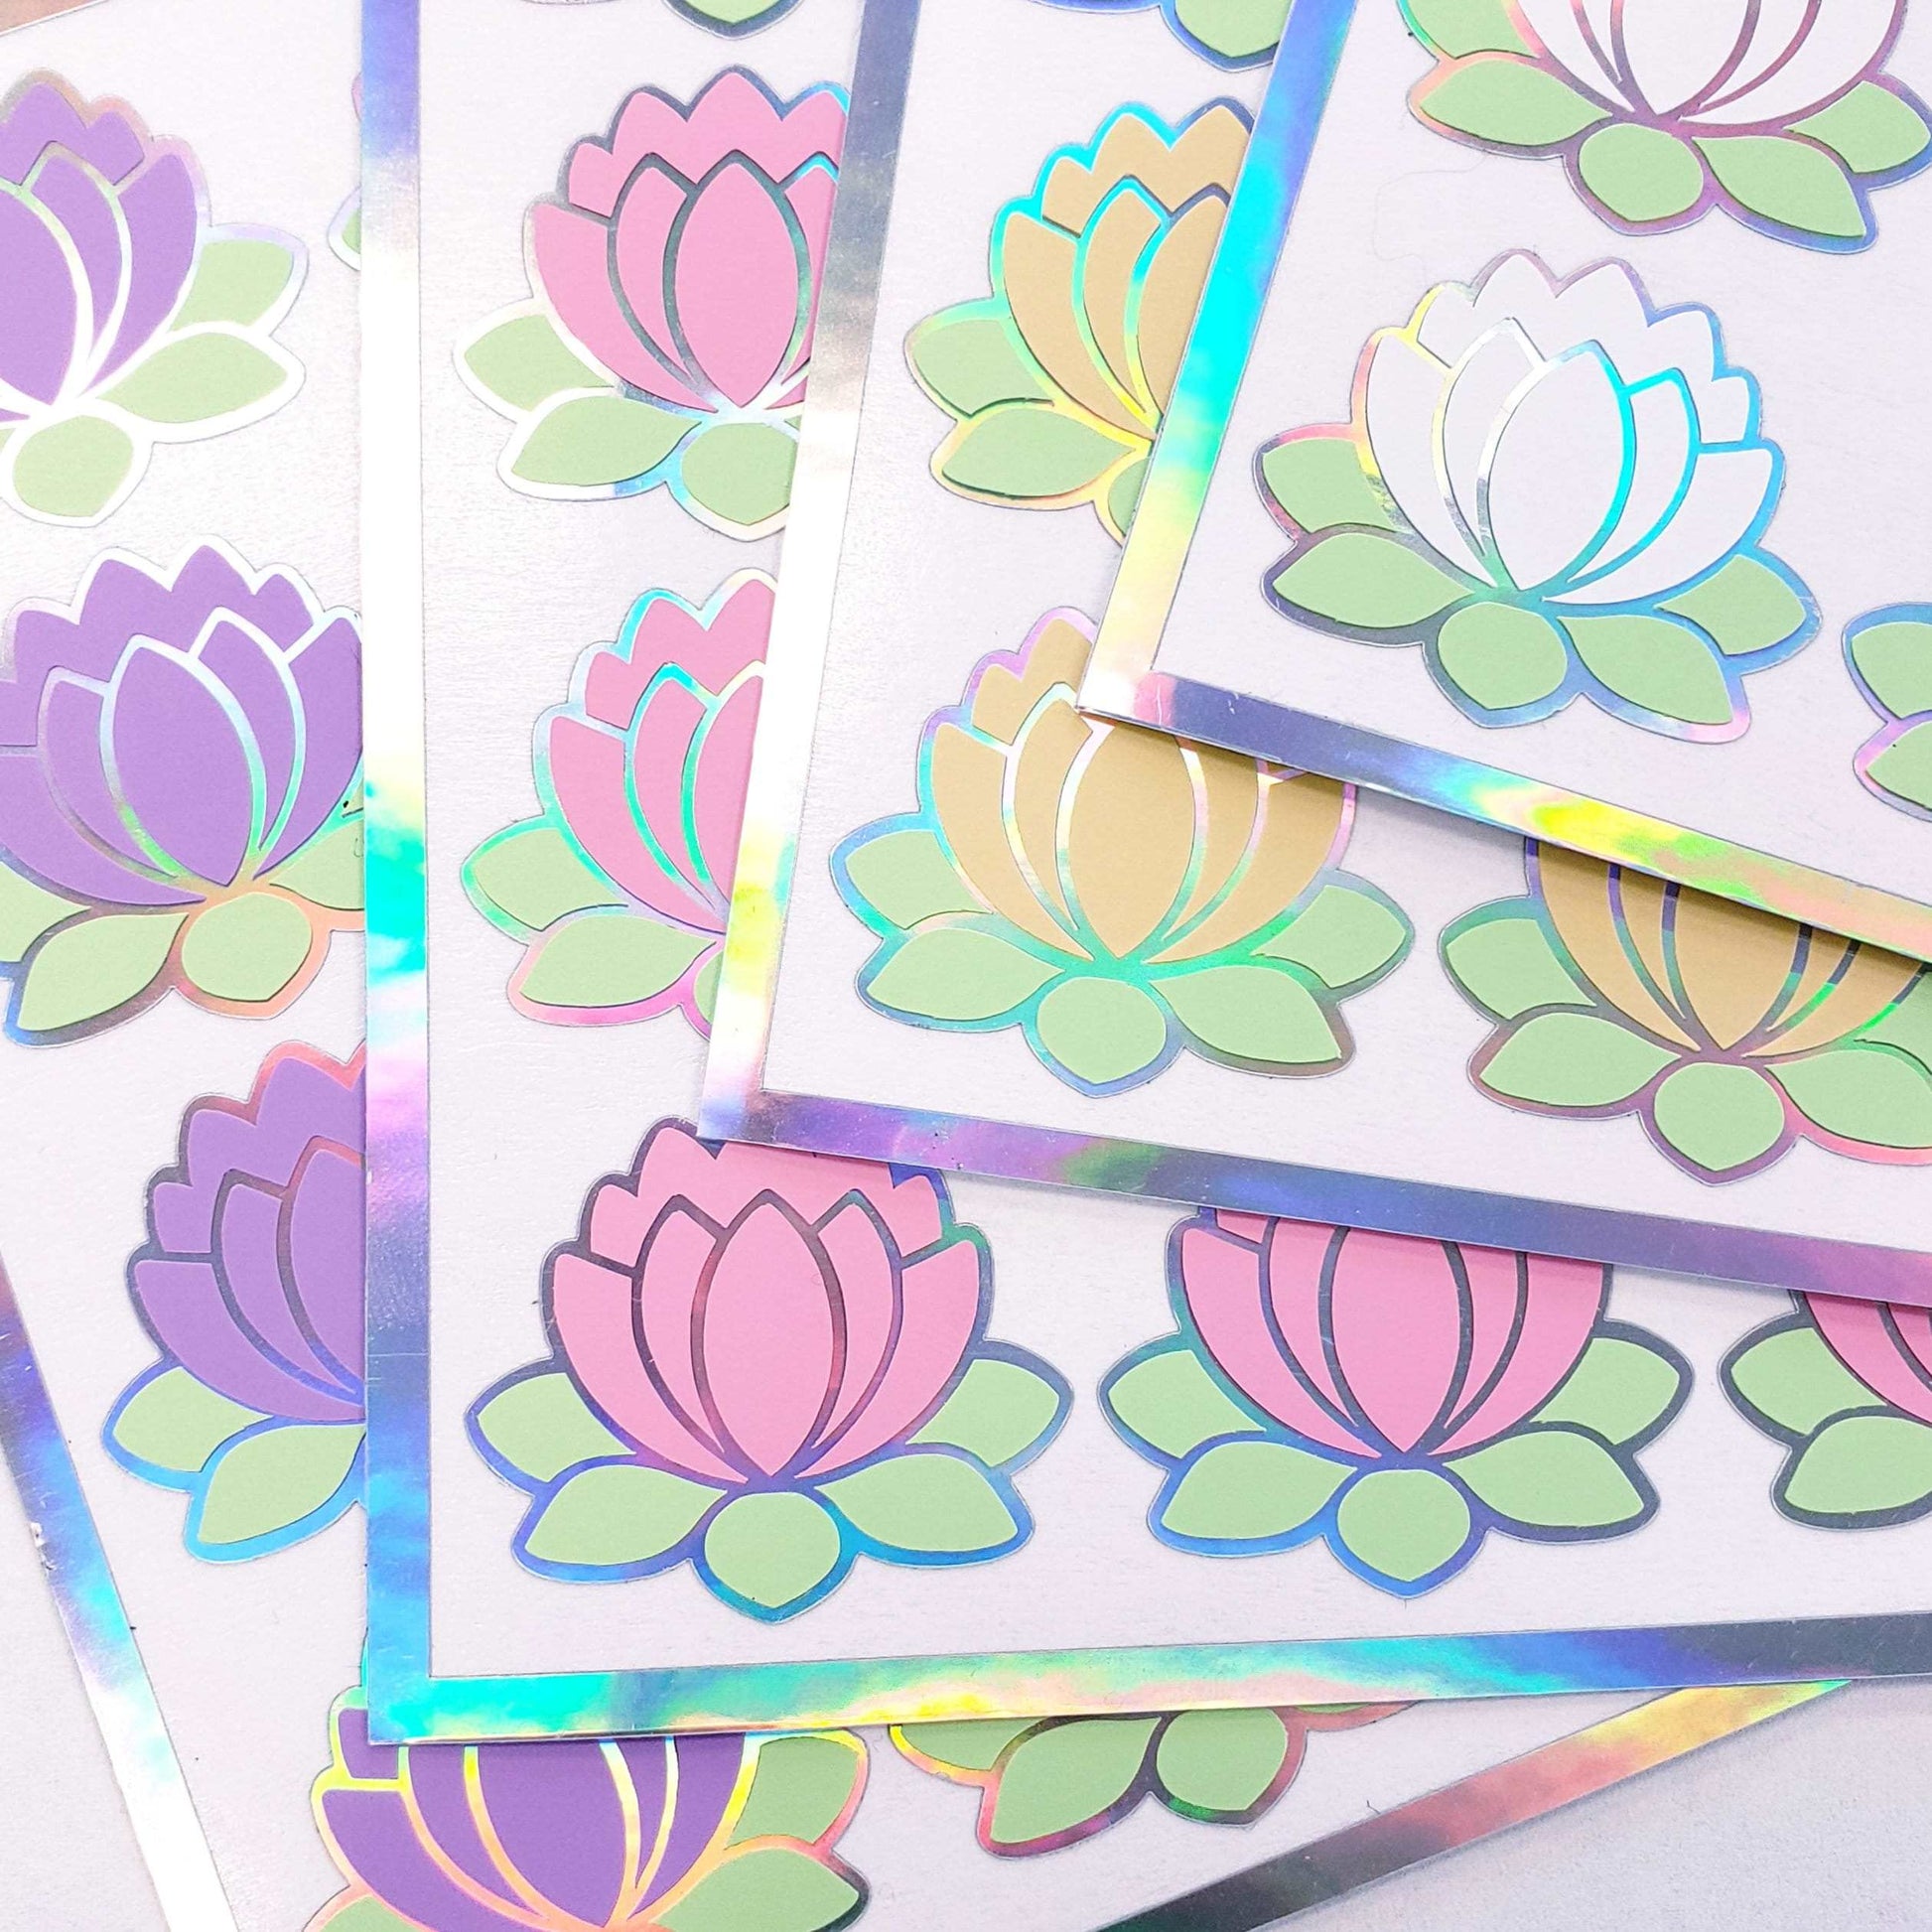 Pink Lotus Flower Stickers, set of 20 pastel light pink flower vinyl decals for Easter, Mother's Day and spring weddings. Peel and stick.